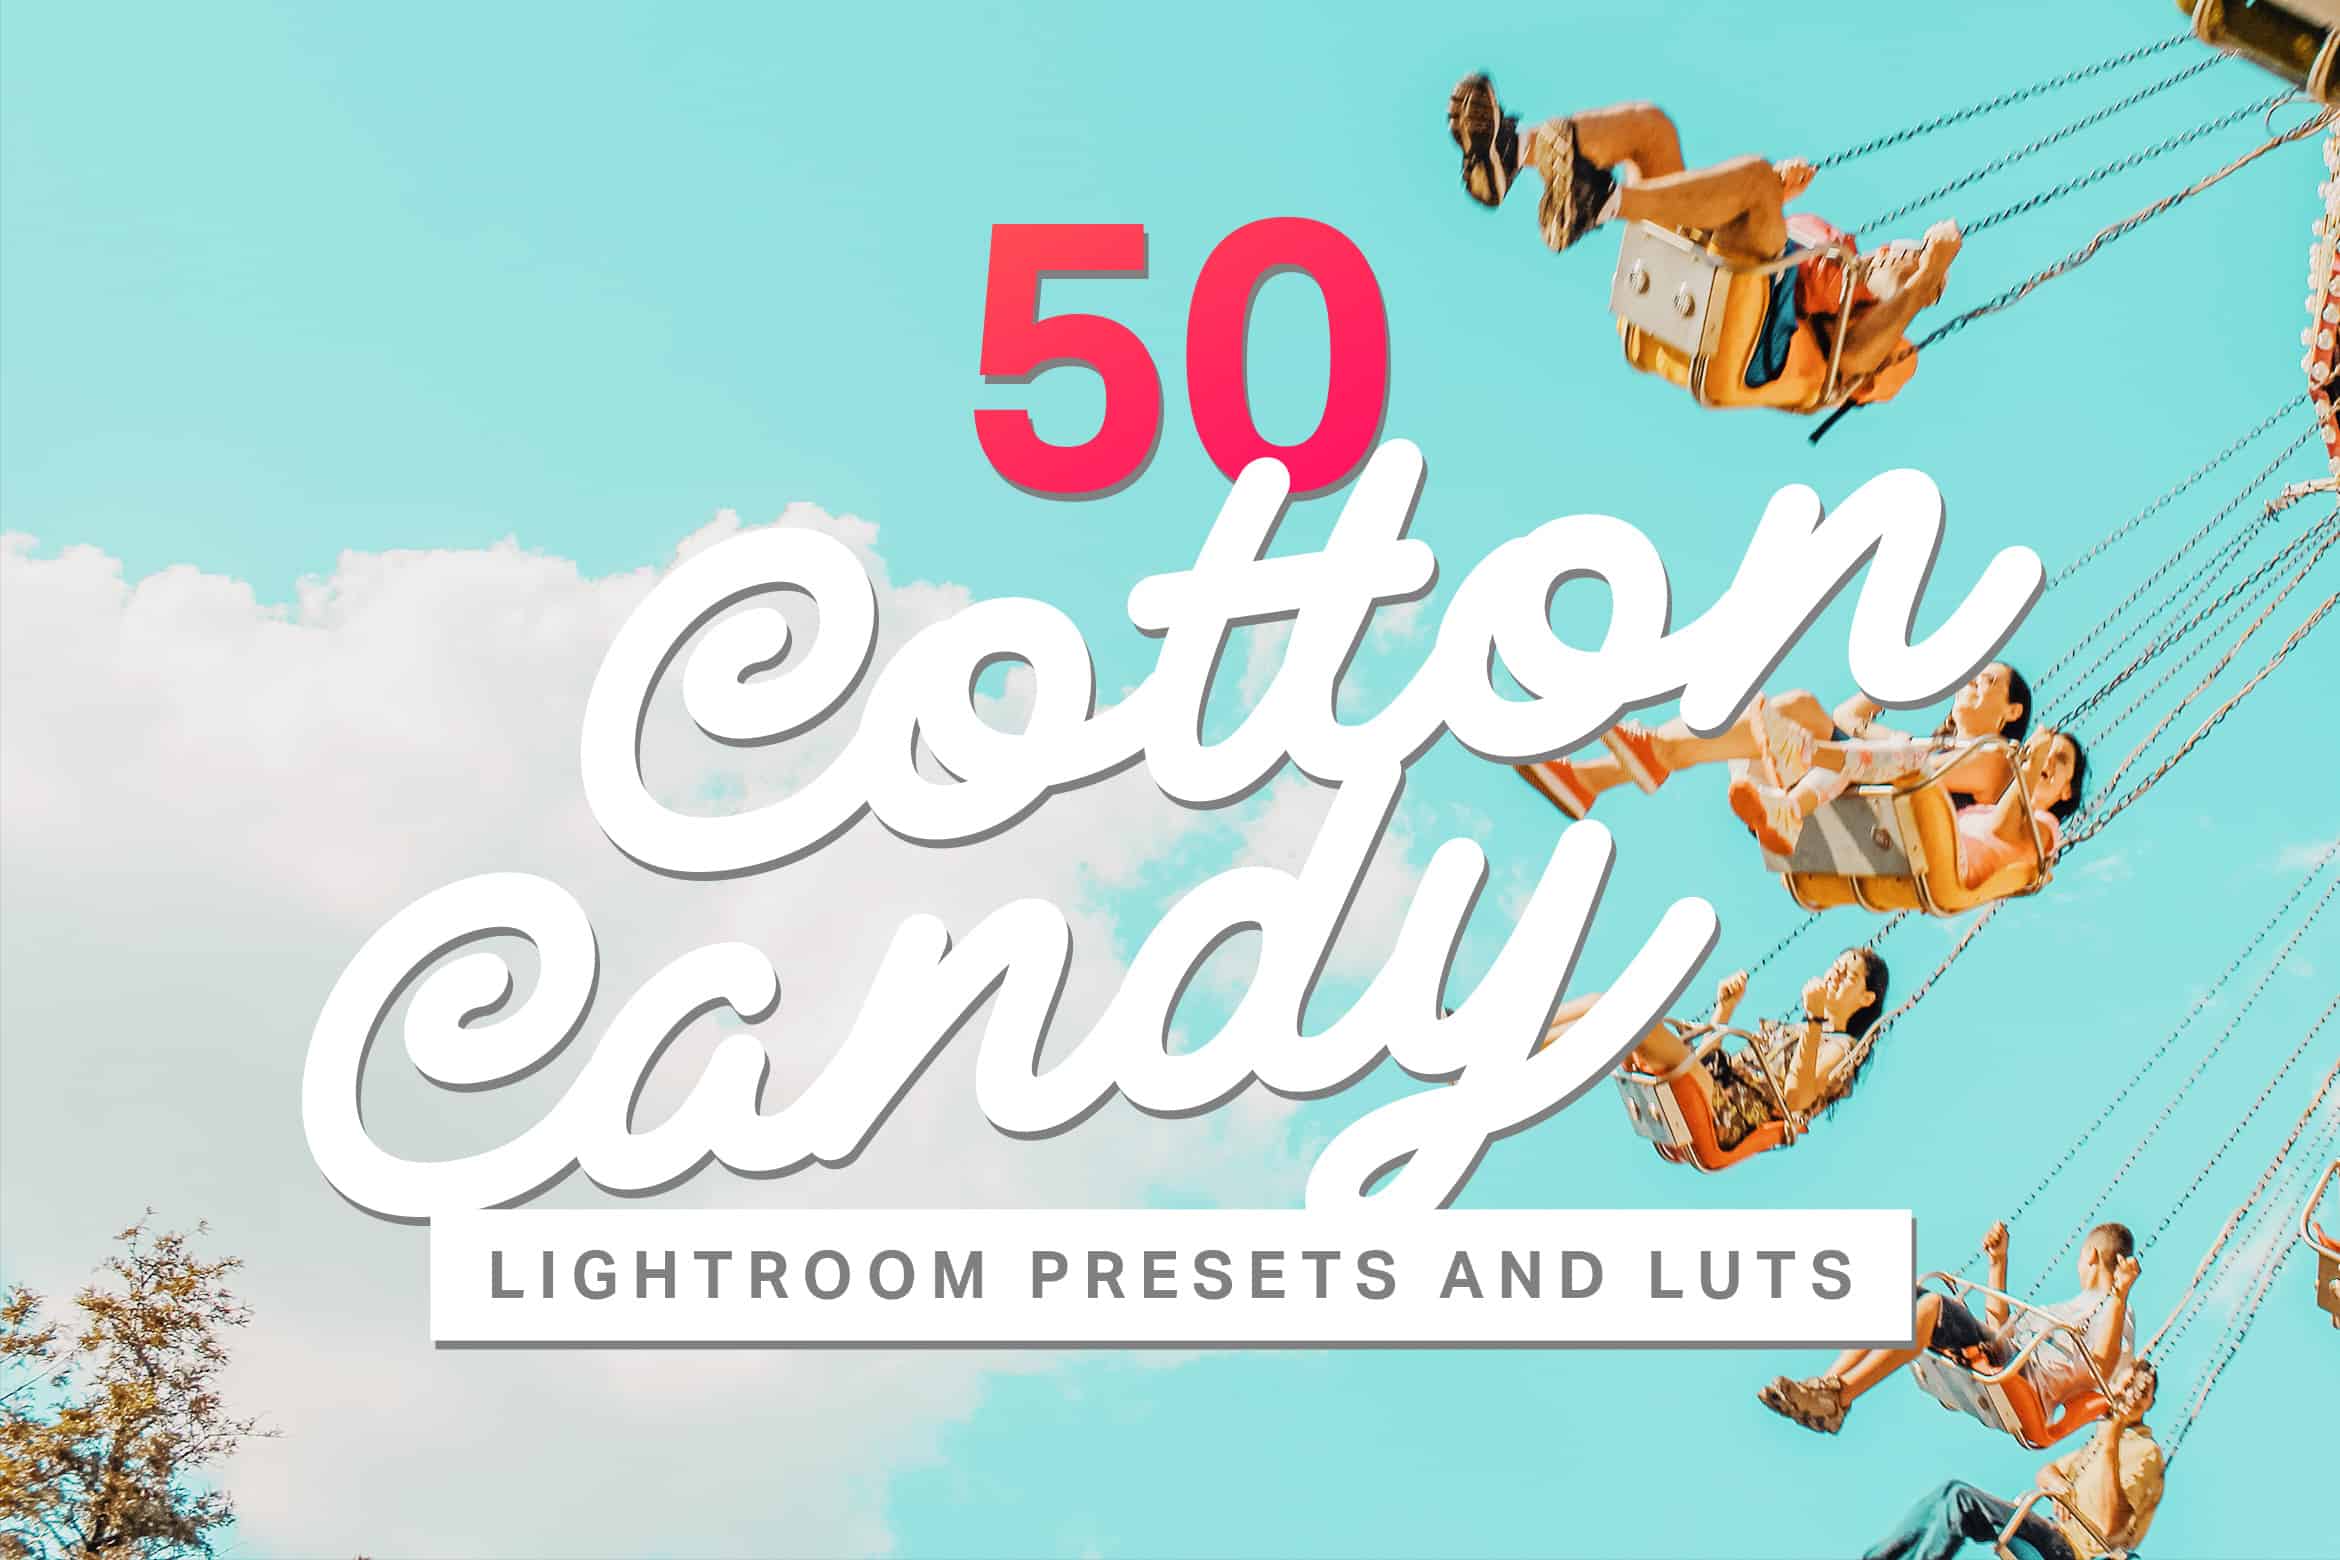 50 Cotton Candy Lightroom Presets and LUTs